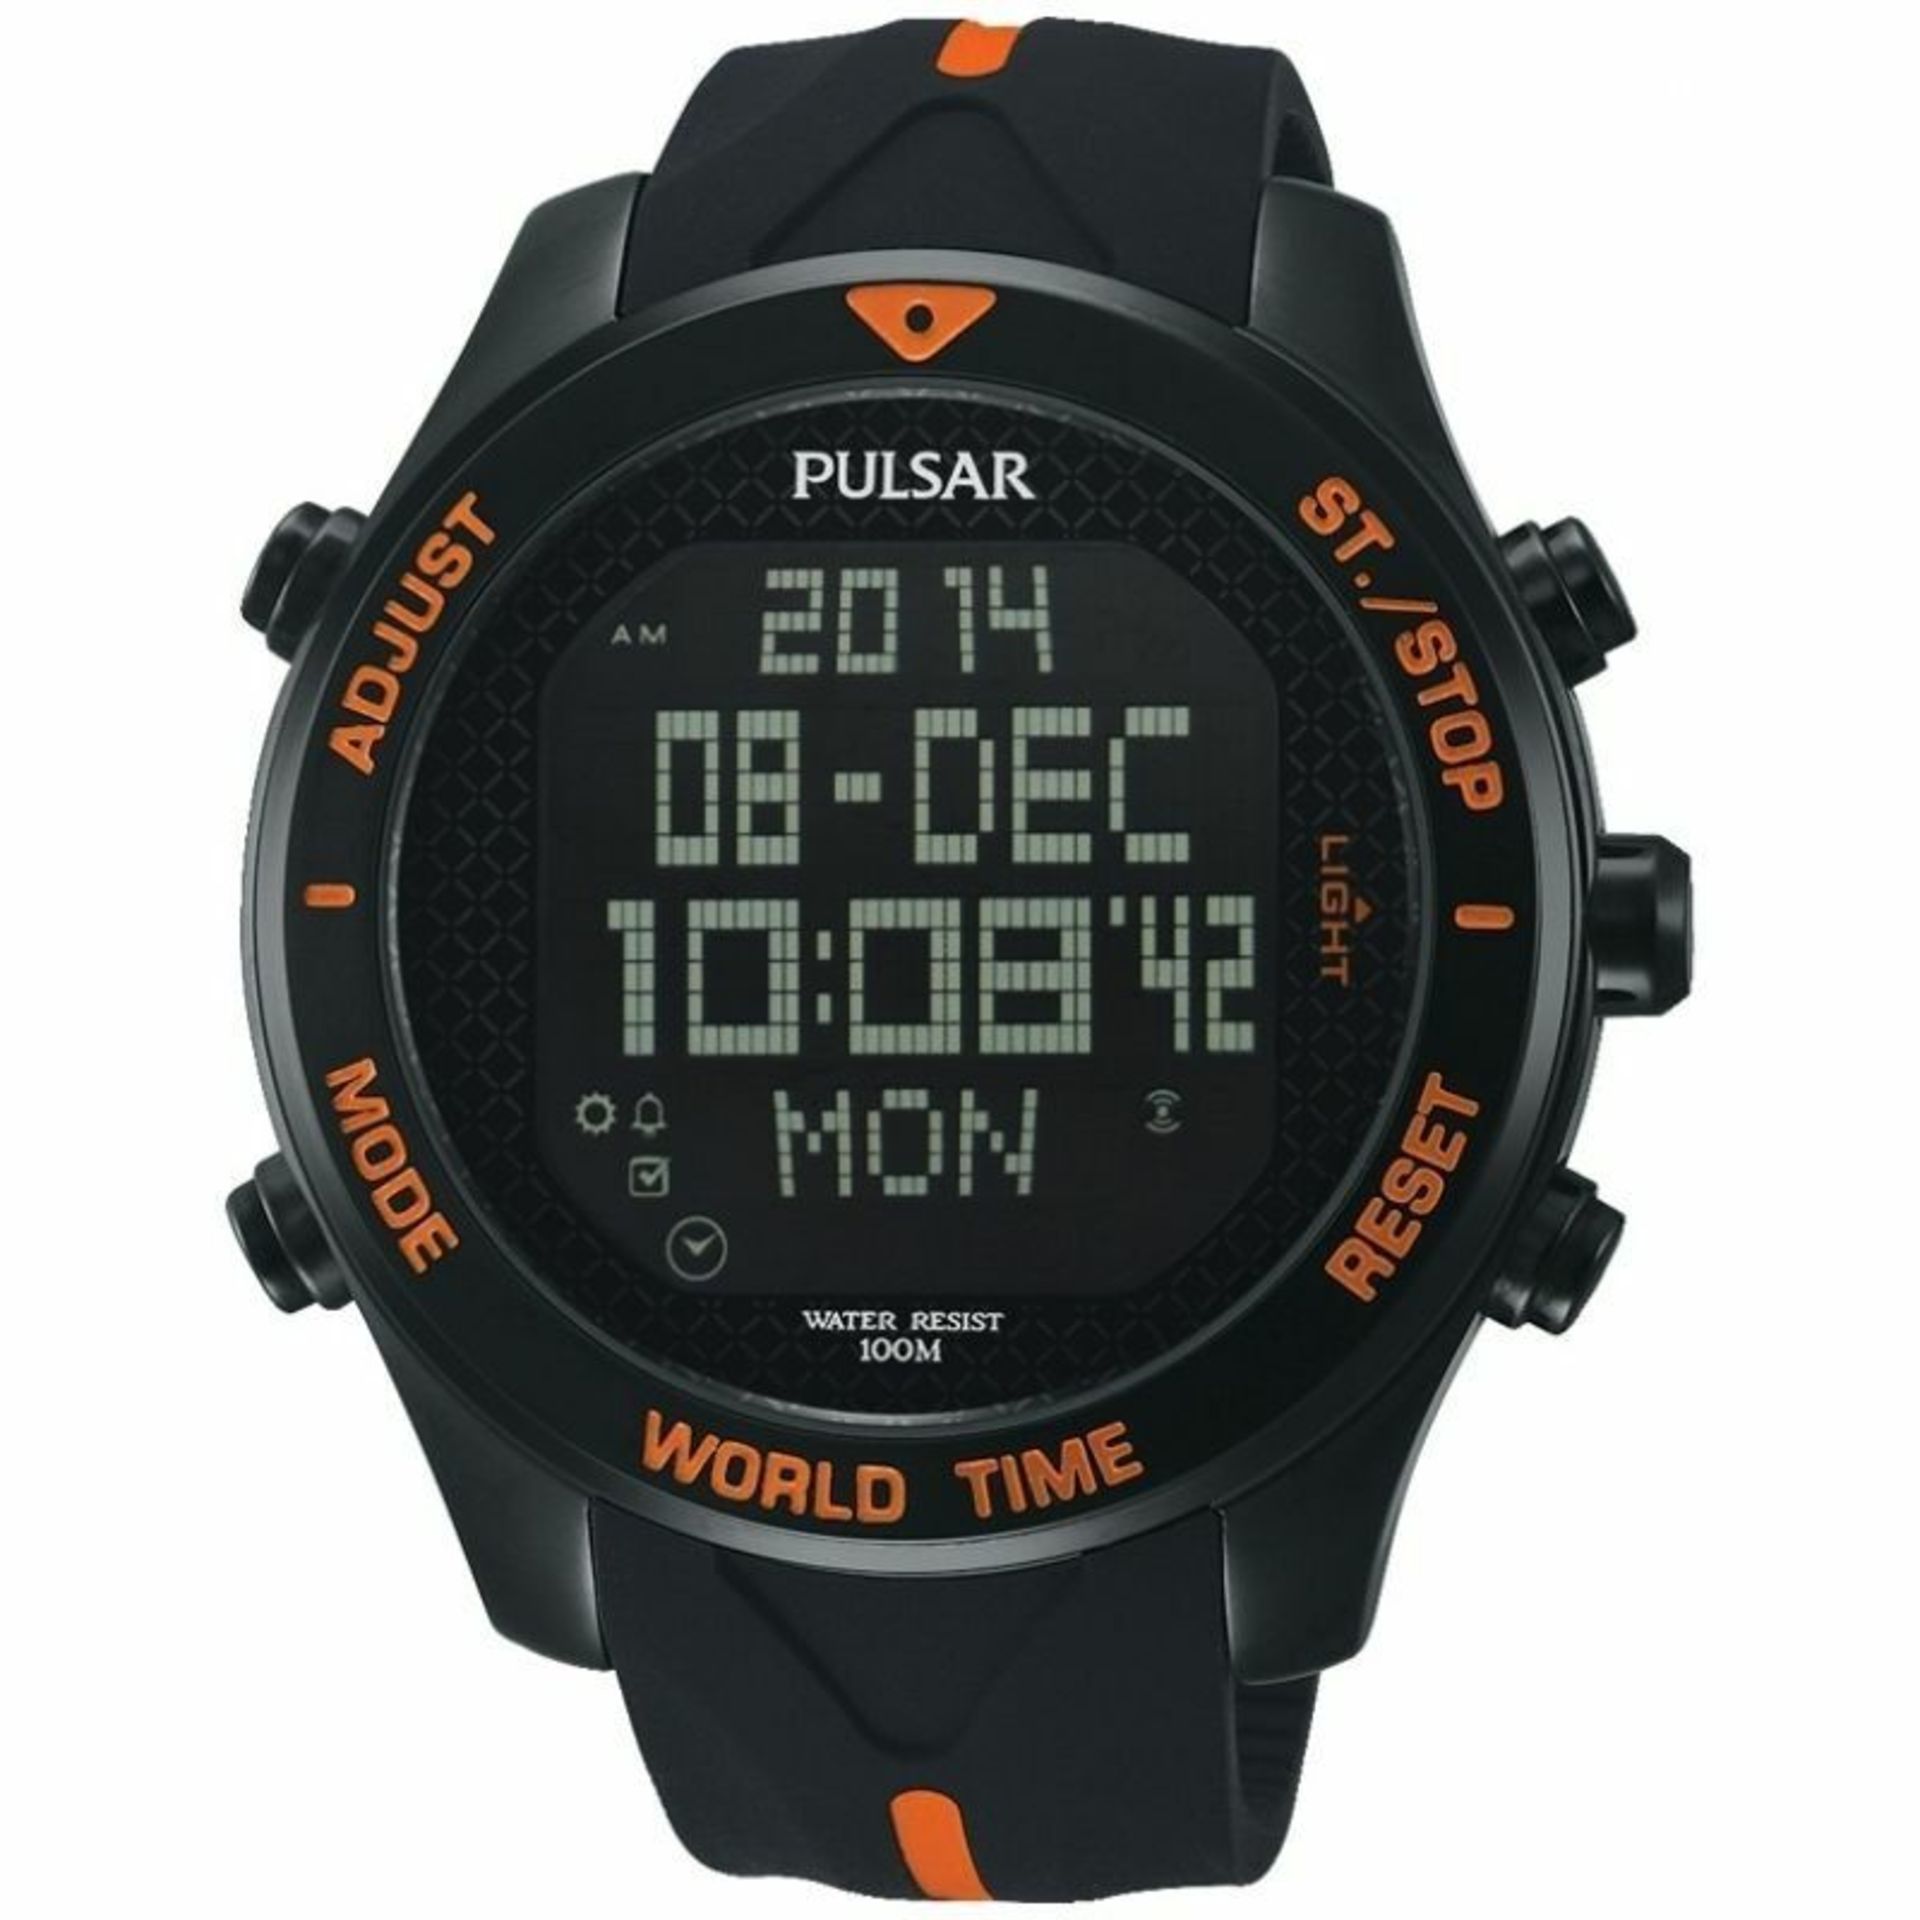 Pulsar Gents Digital Rubber Strap Multi-Function Sports Watch PQ2037 - Image 3 of 3